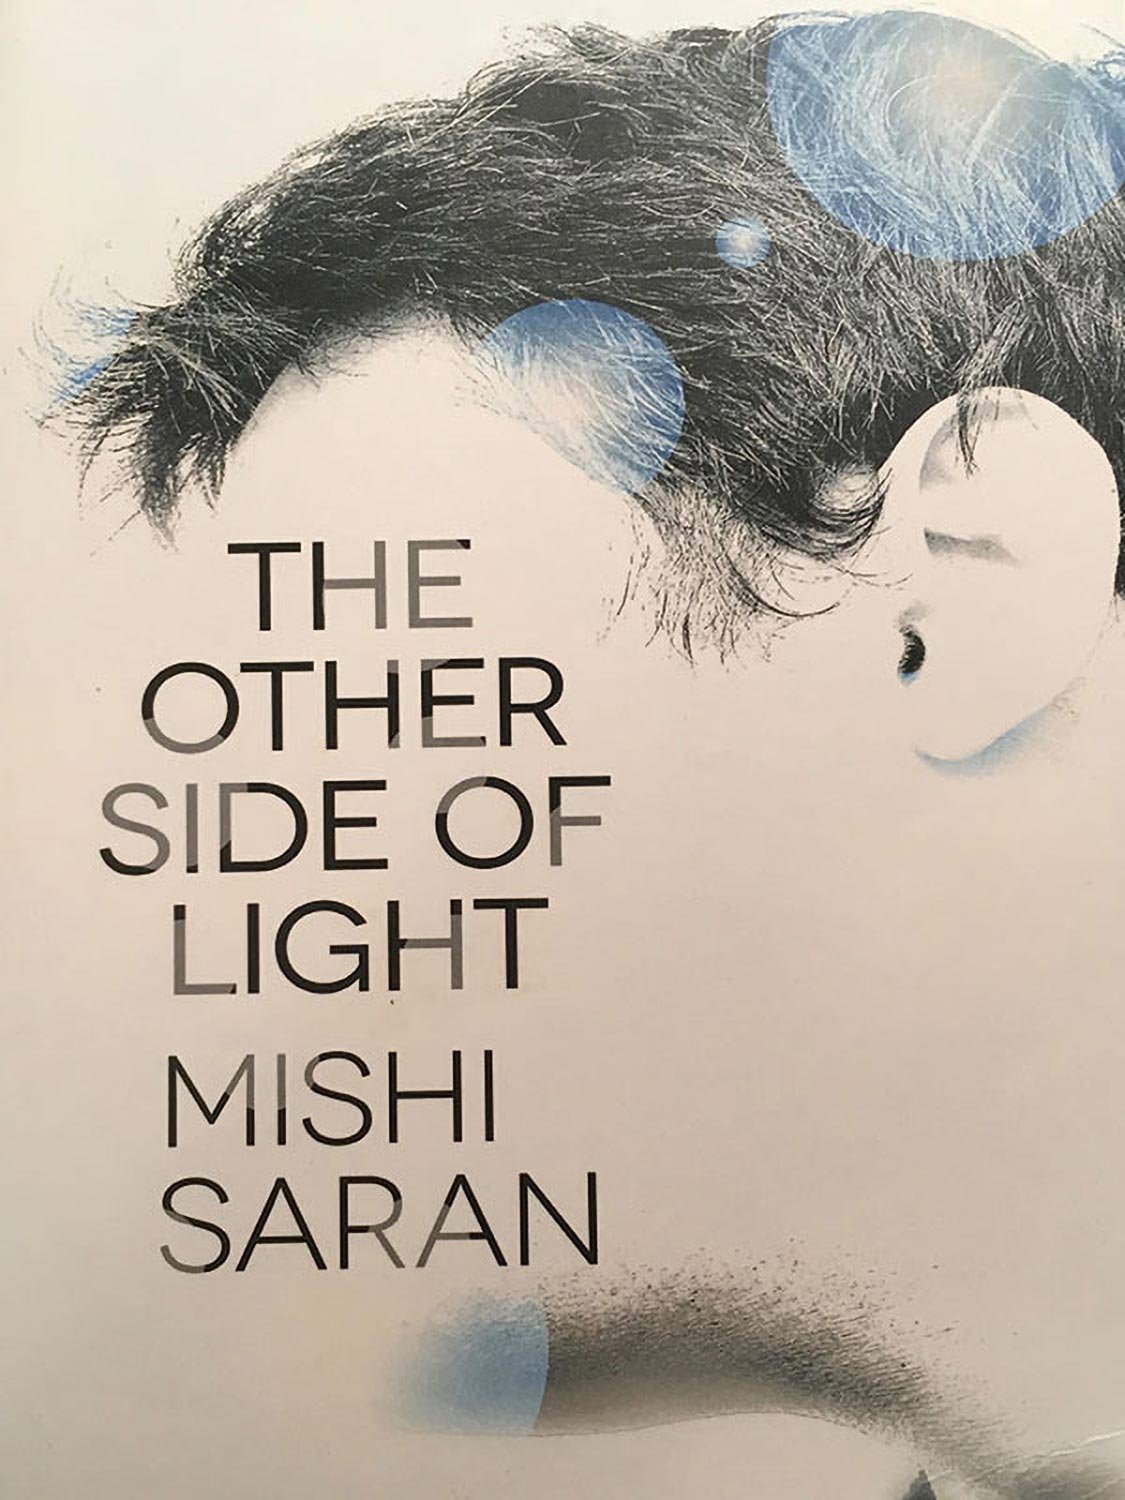 The Other Side of Light by Mishi Saran